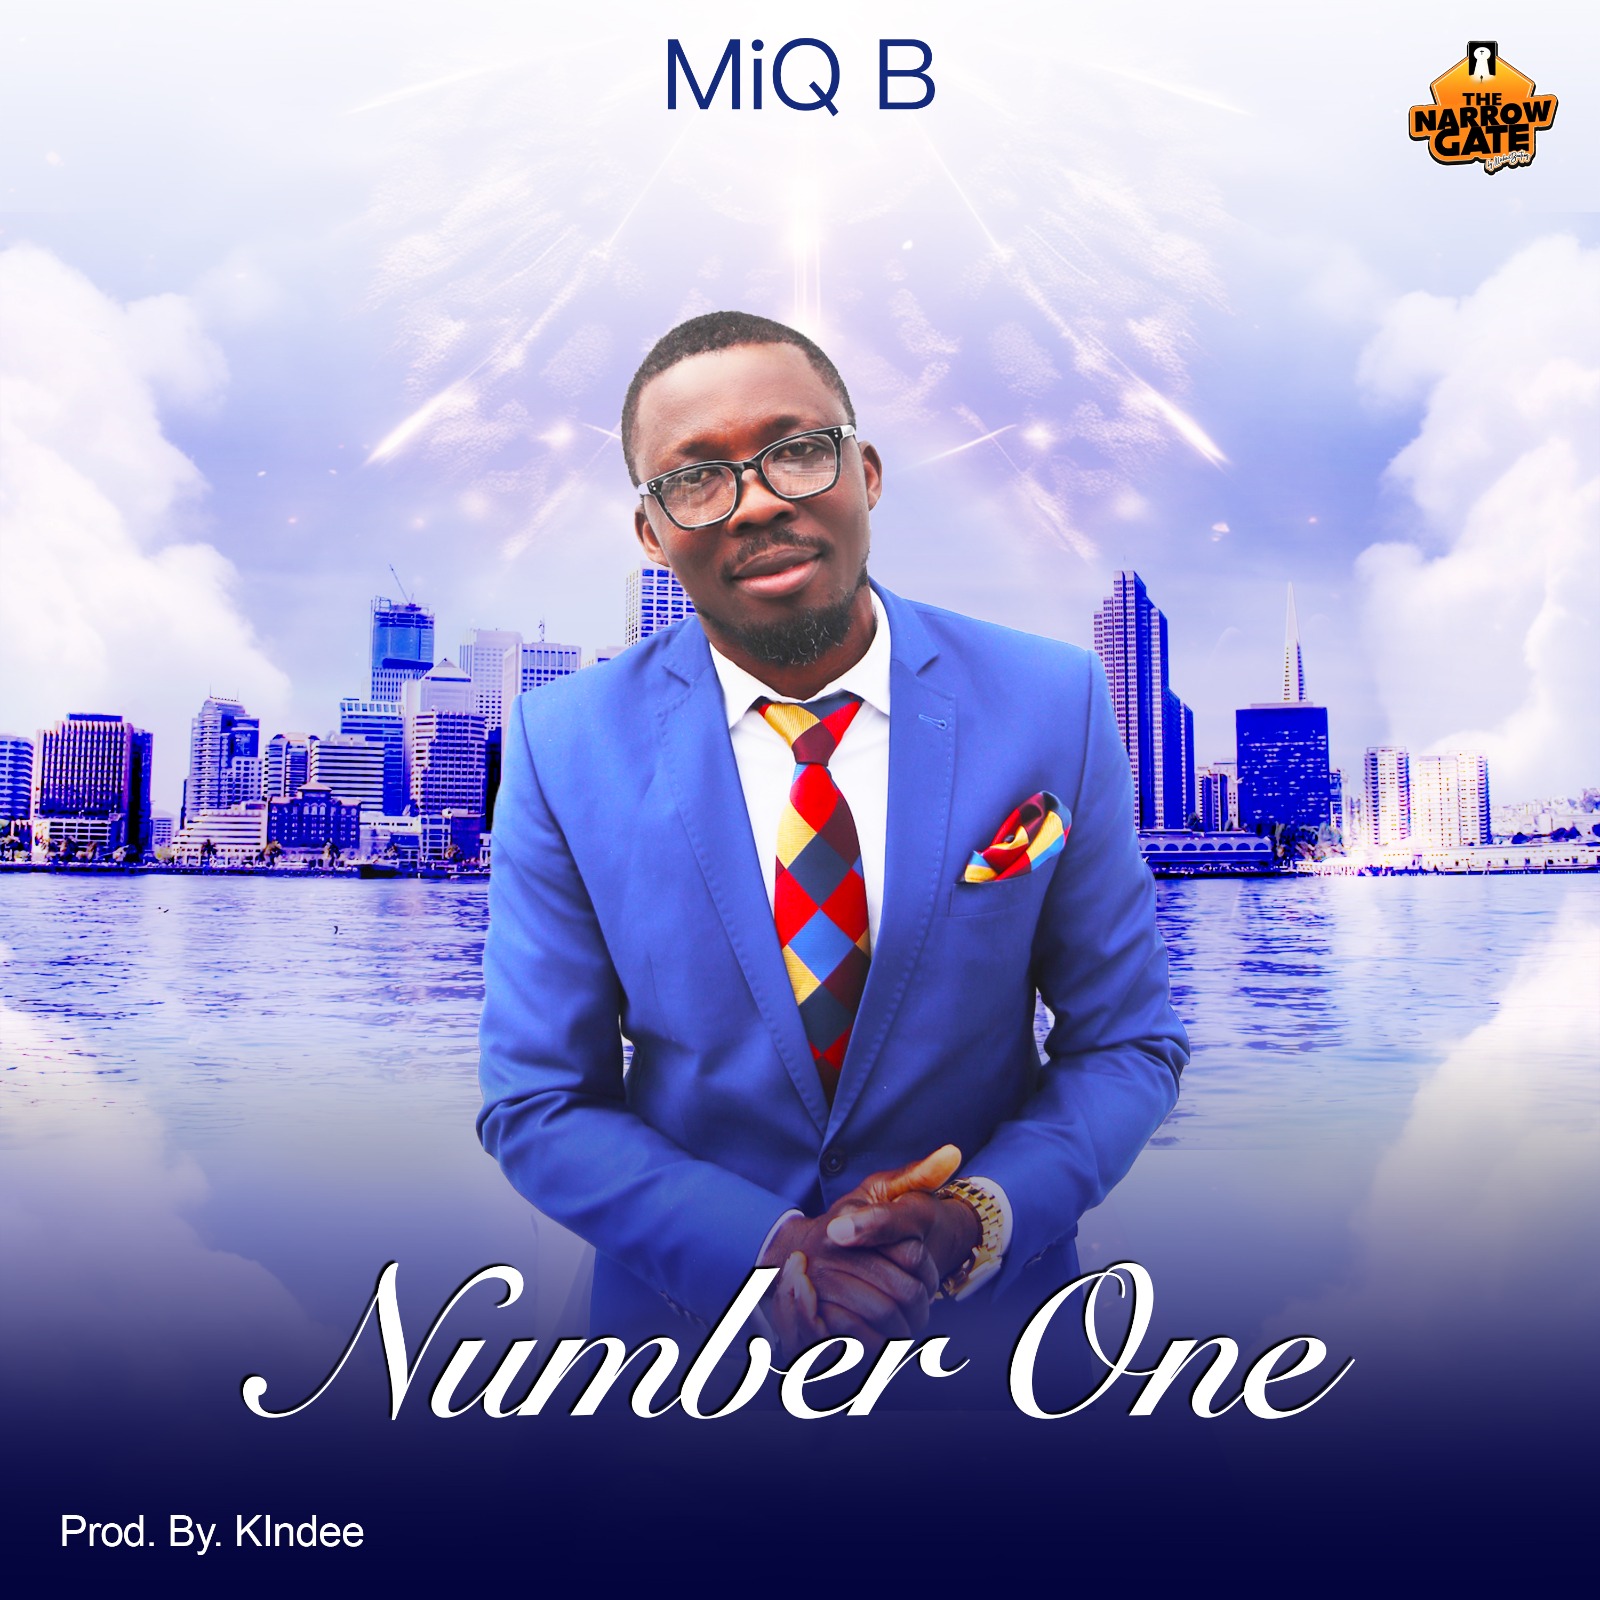 Gospel Star MIQ B releases new single ‘Number One’